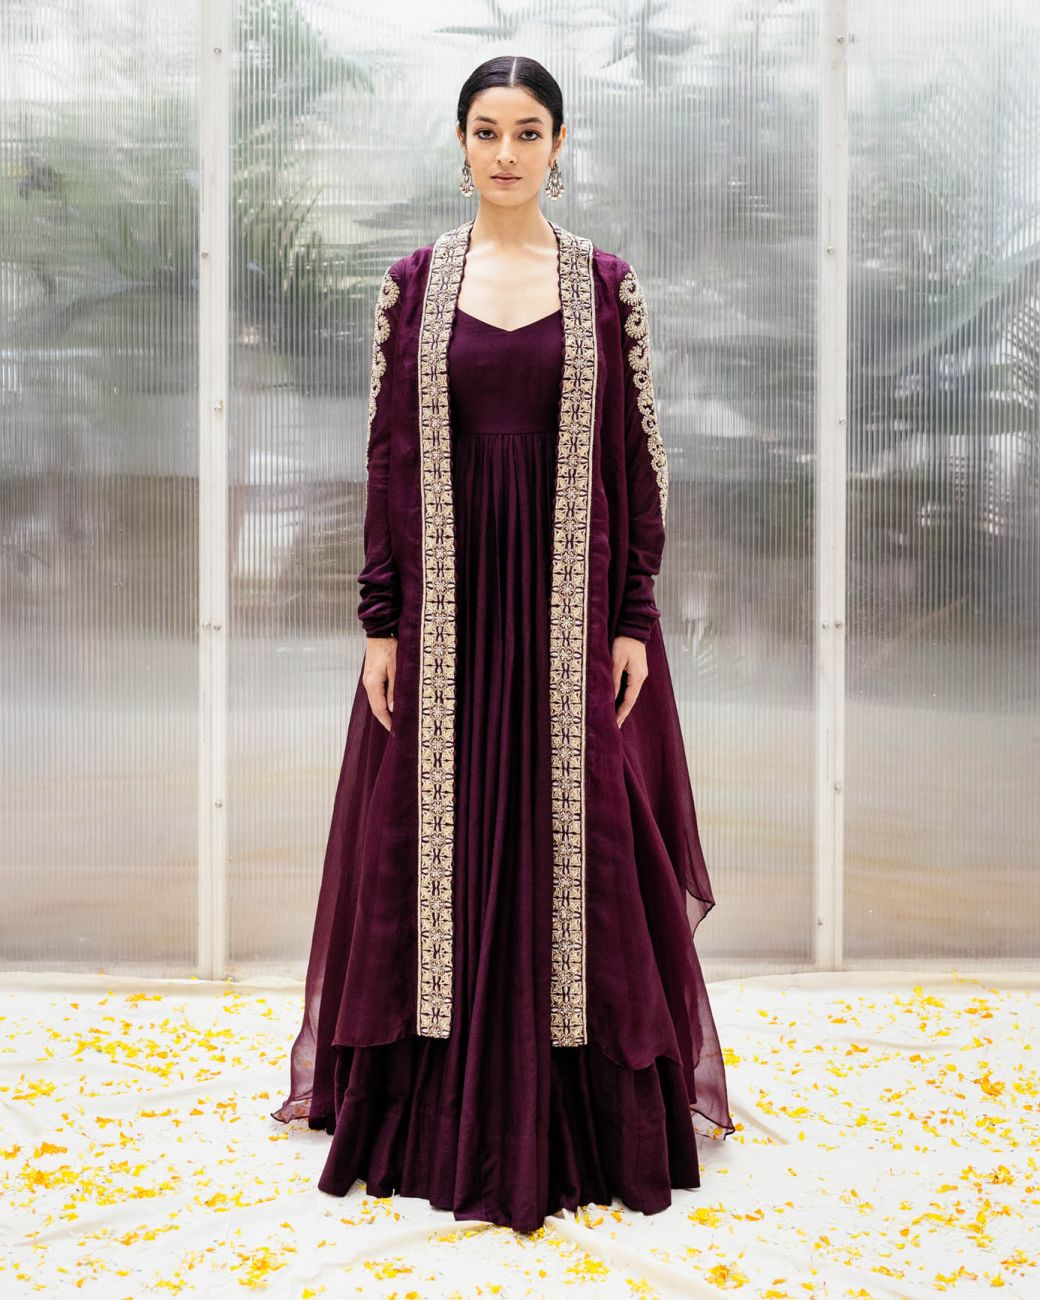 Plum Anarkali With Embroidered Cape - Indian Clothing in Denver, CO, Aurora, CO, Boulder, CO, Fort Collins, CO, Colorado Springs, CO, Parker, CO, Highlands Ranch, CO, Cherry Creek, CO, Centennial, CO, and Longmont, CO. Nationwide shipping USA - India Fashion X